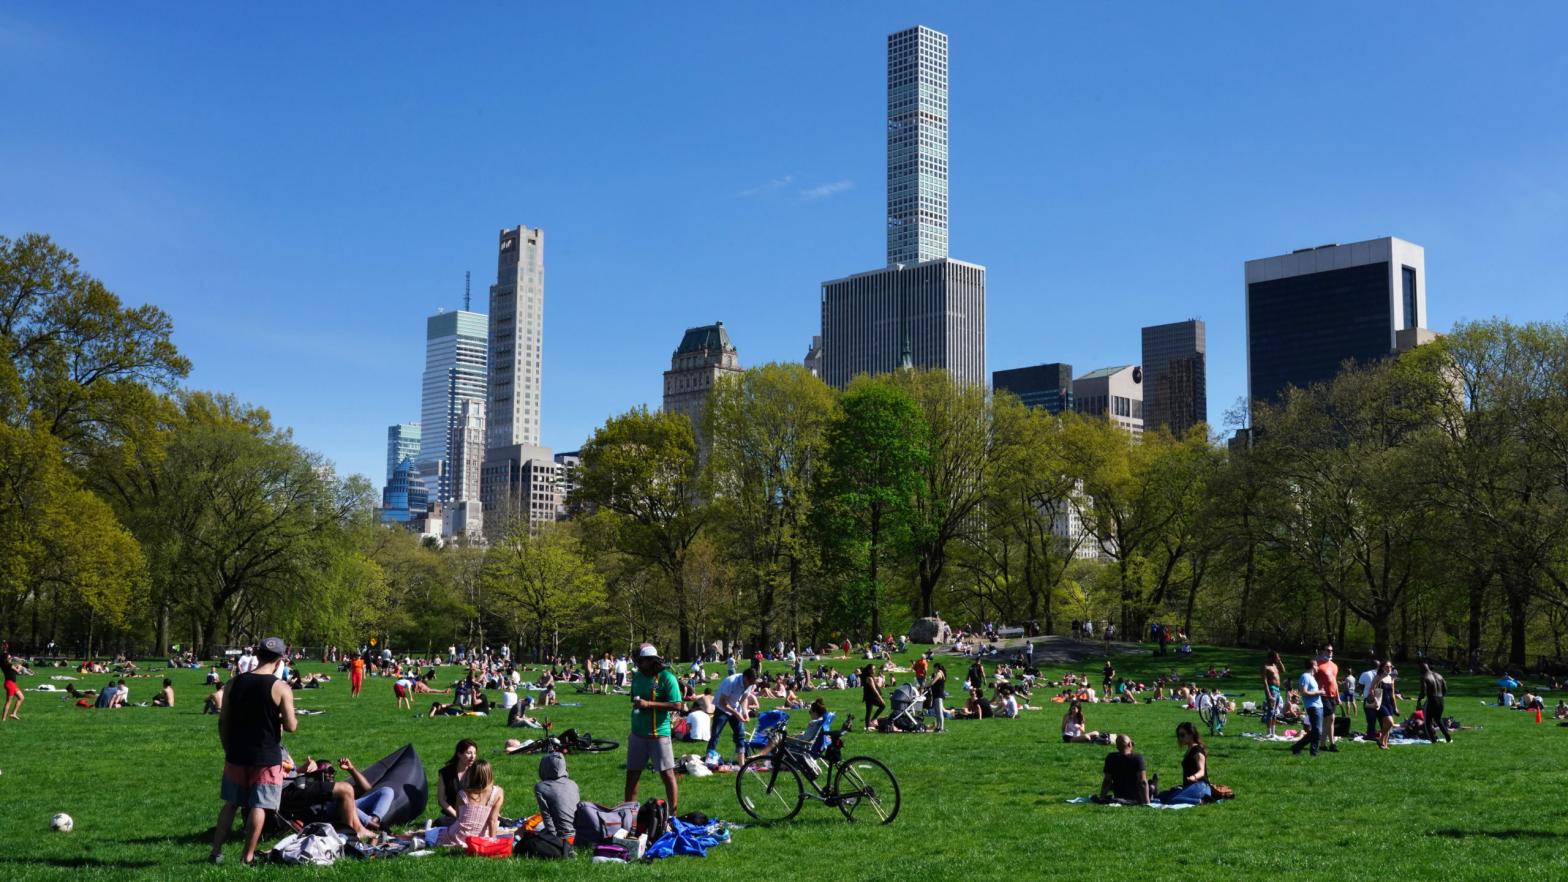 The good life in Central Park. (Photo: Cindy Ord, Getty Images)